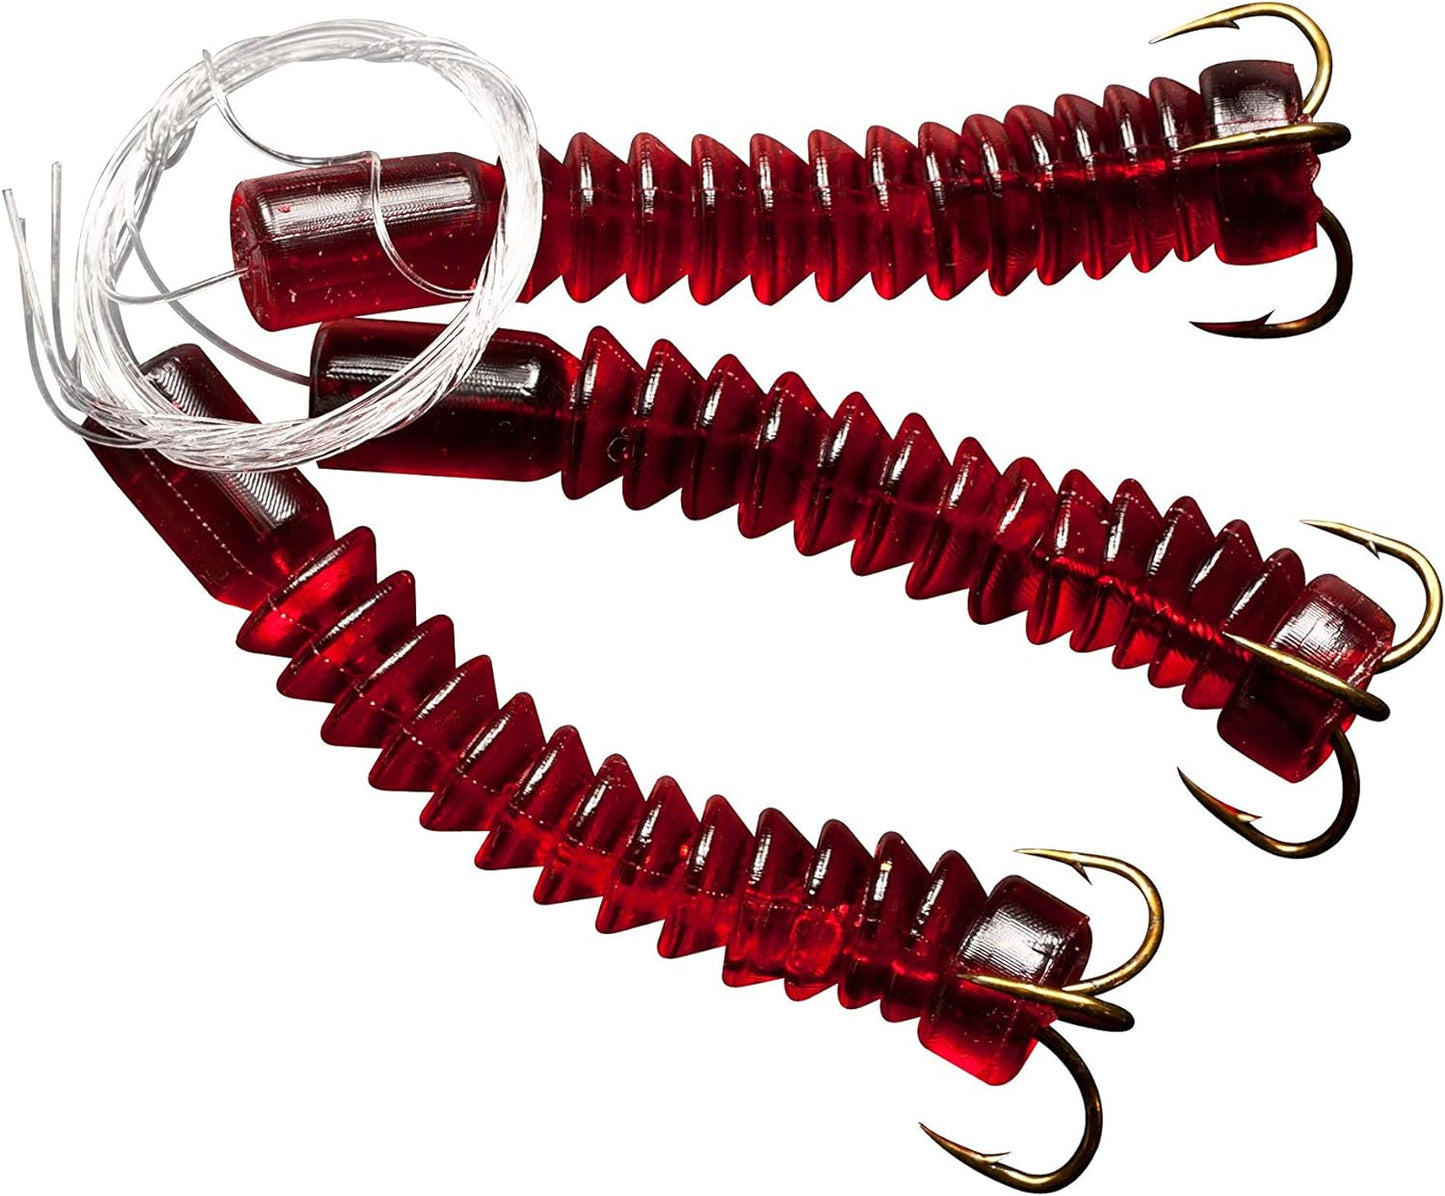 Catfish Dip Bait Worms and Hooks - Red - 3 Pack